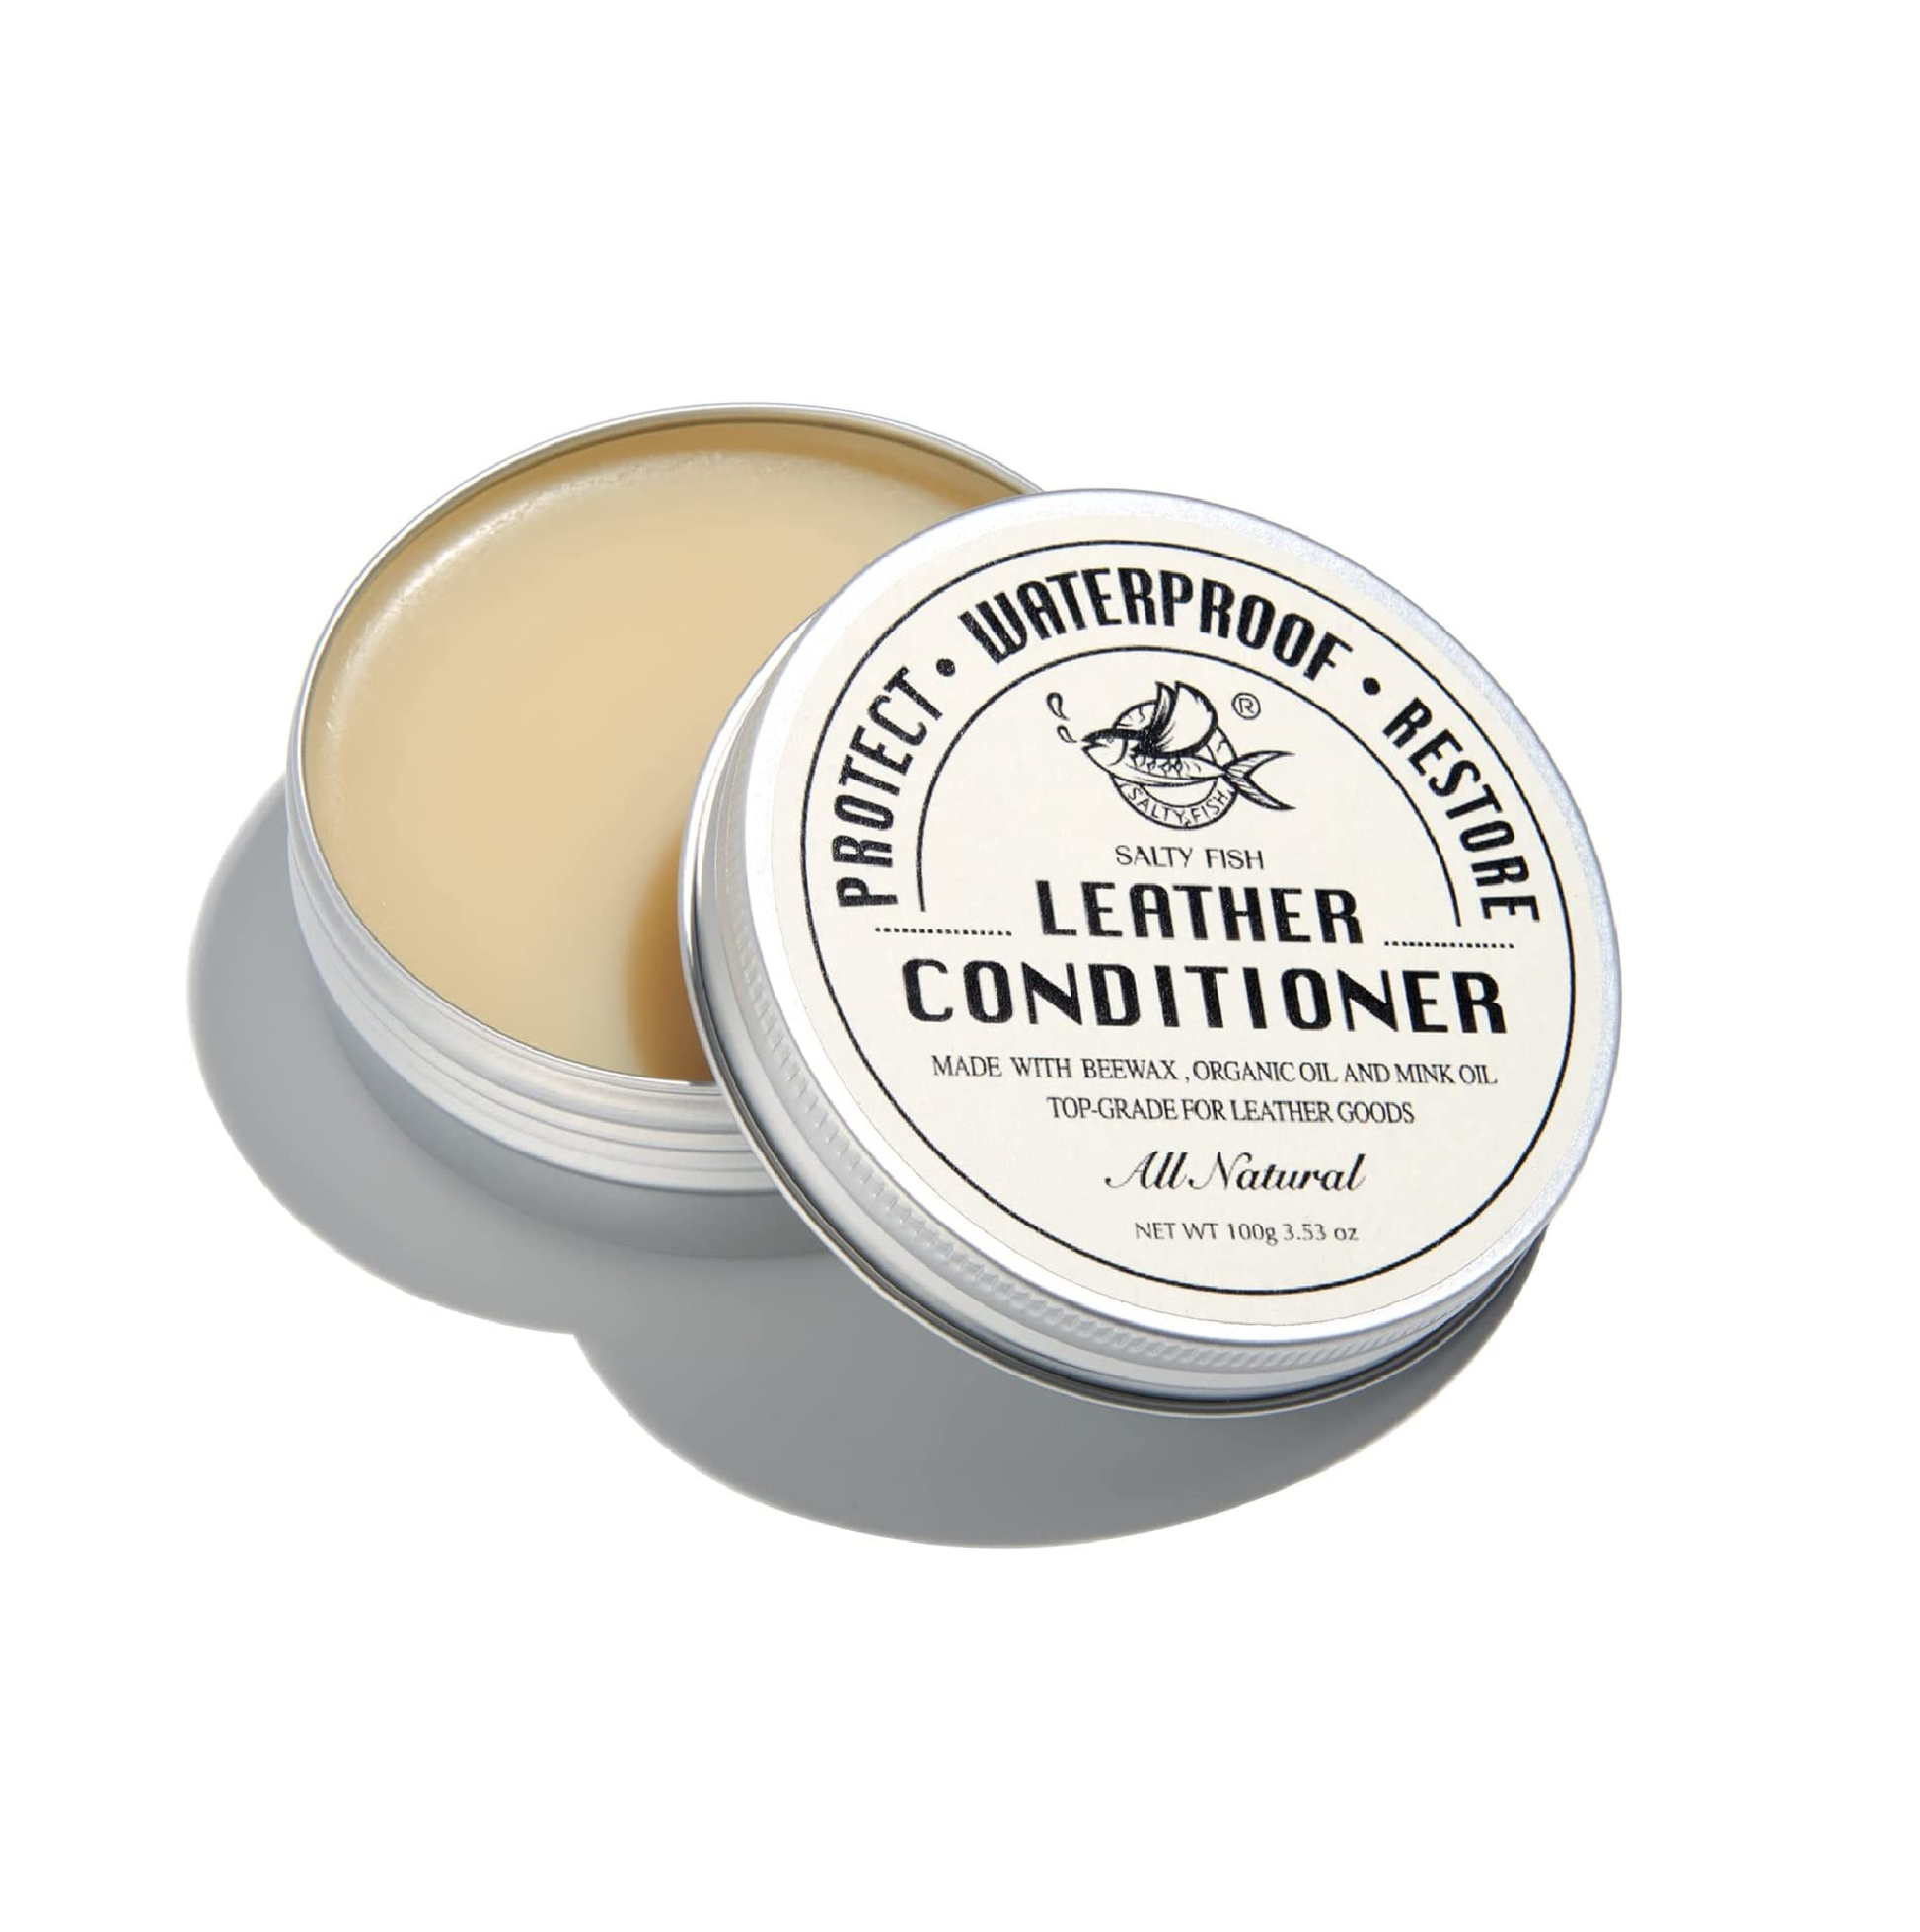 Aged Leather Pros Beeswax Leather Conditioner to Protect, Soften & Restore Recommended by Pros for Genuine Leather, All Natural & Non-Toxic, Made in